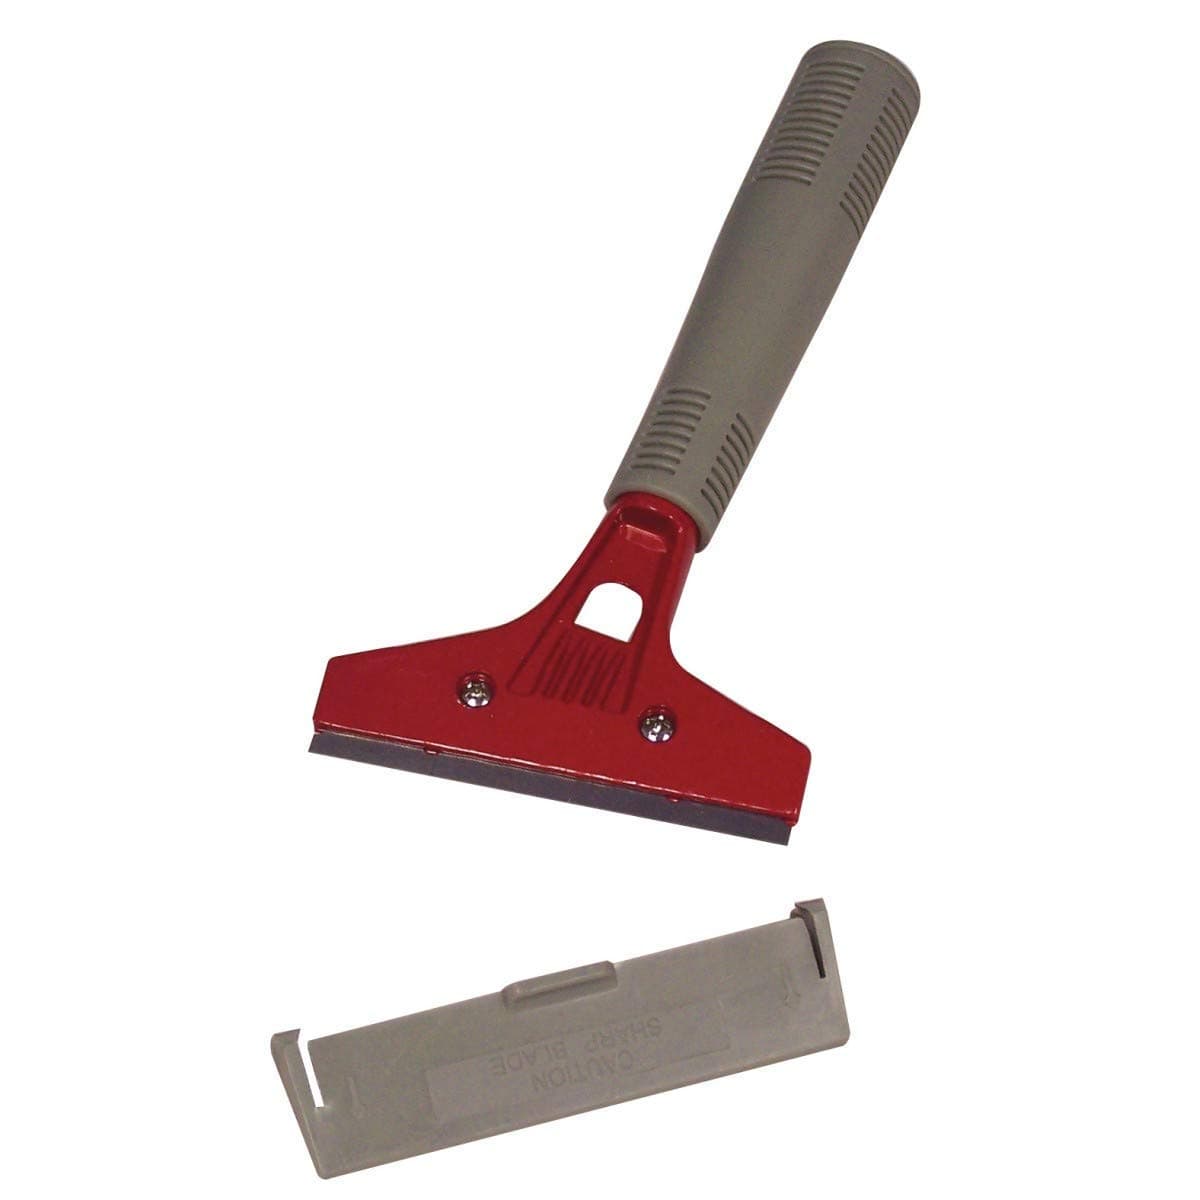 Plastic Industrial Glass Scraper with Handle | Supply Master | Accra, Ghana Janitorial & Cleaning Buy Tools hardware Building materials